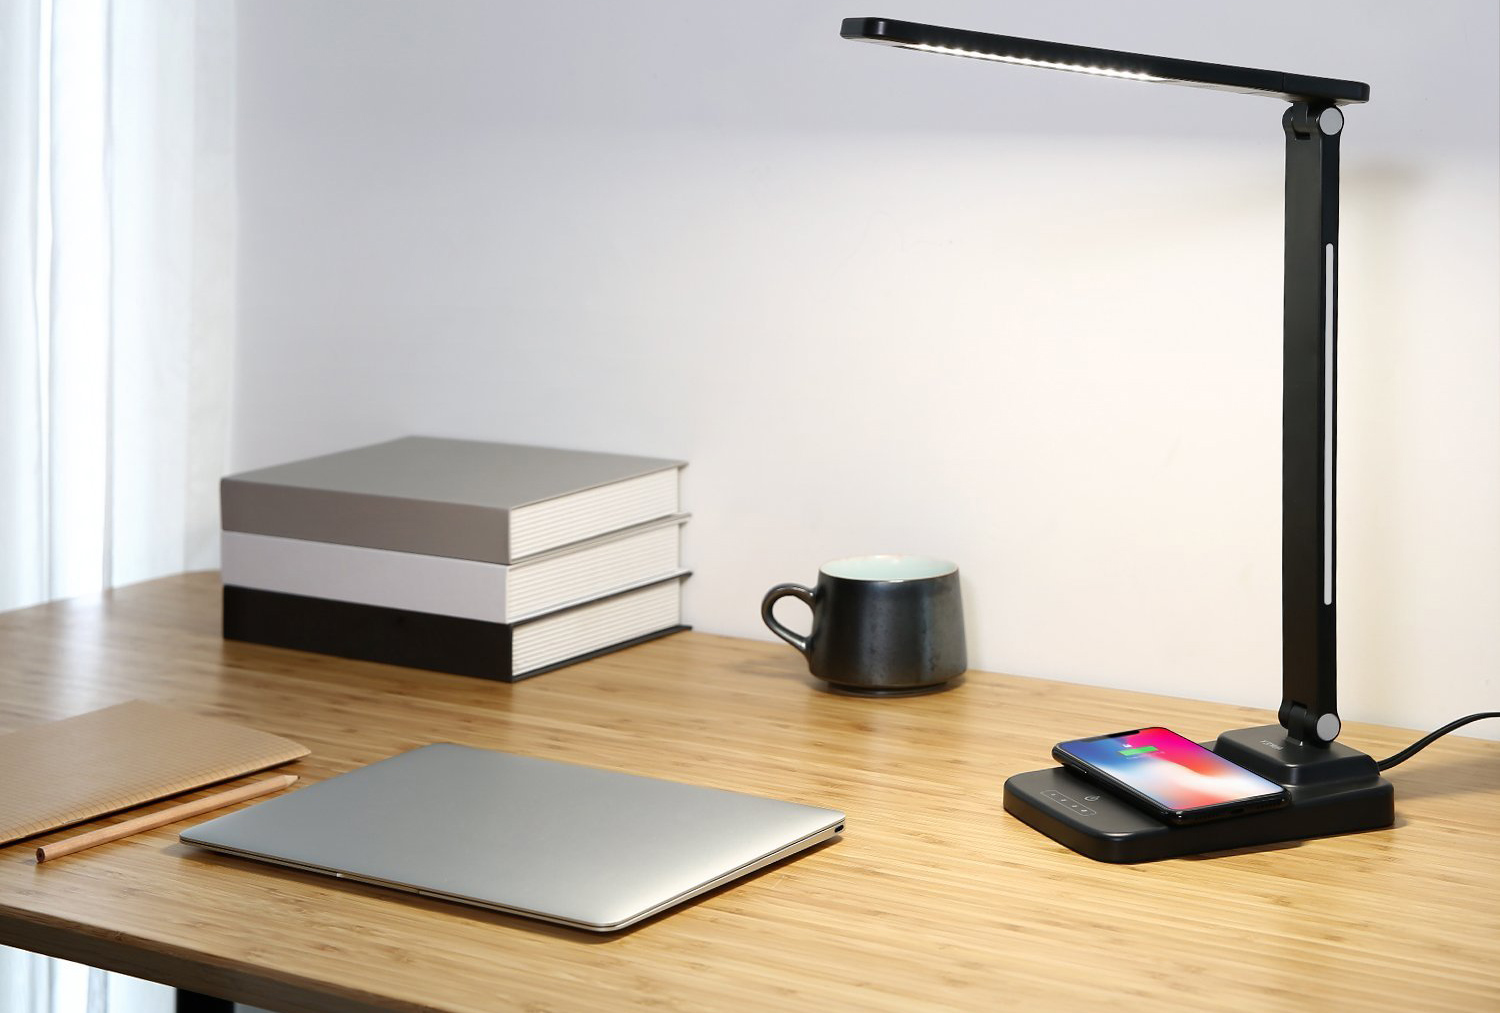 Aukey’s LED desk lamp has a built-in wireless charger, and it’s